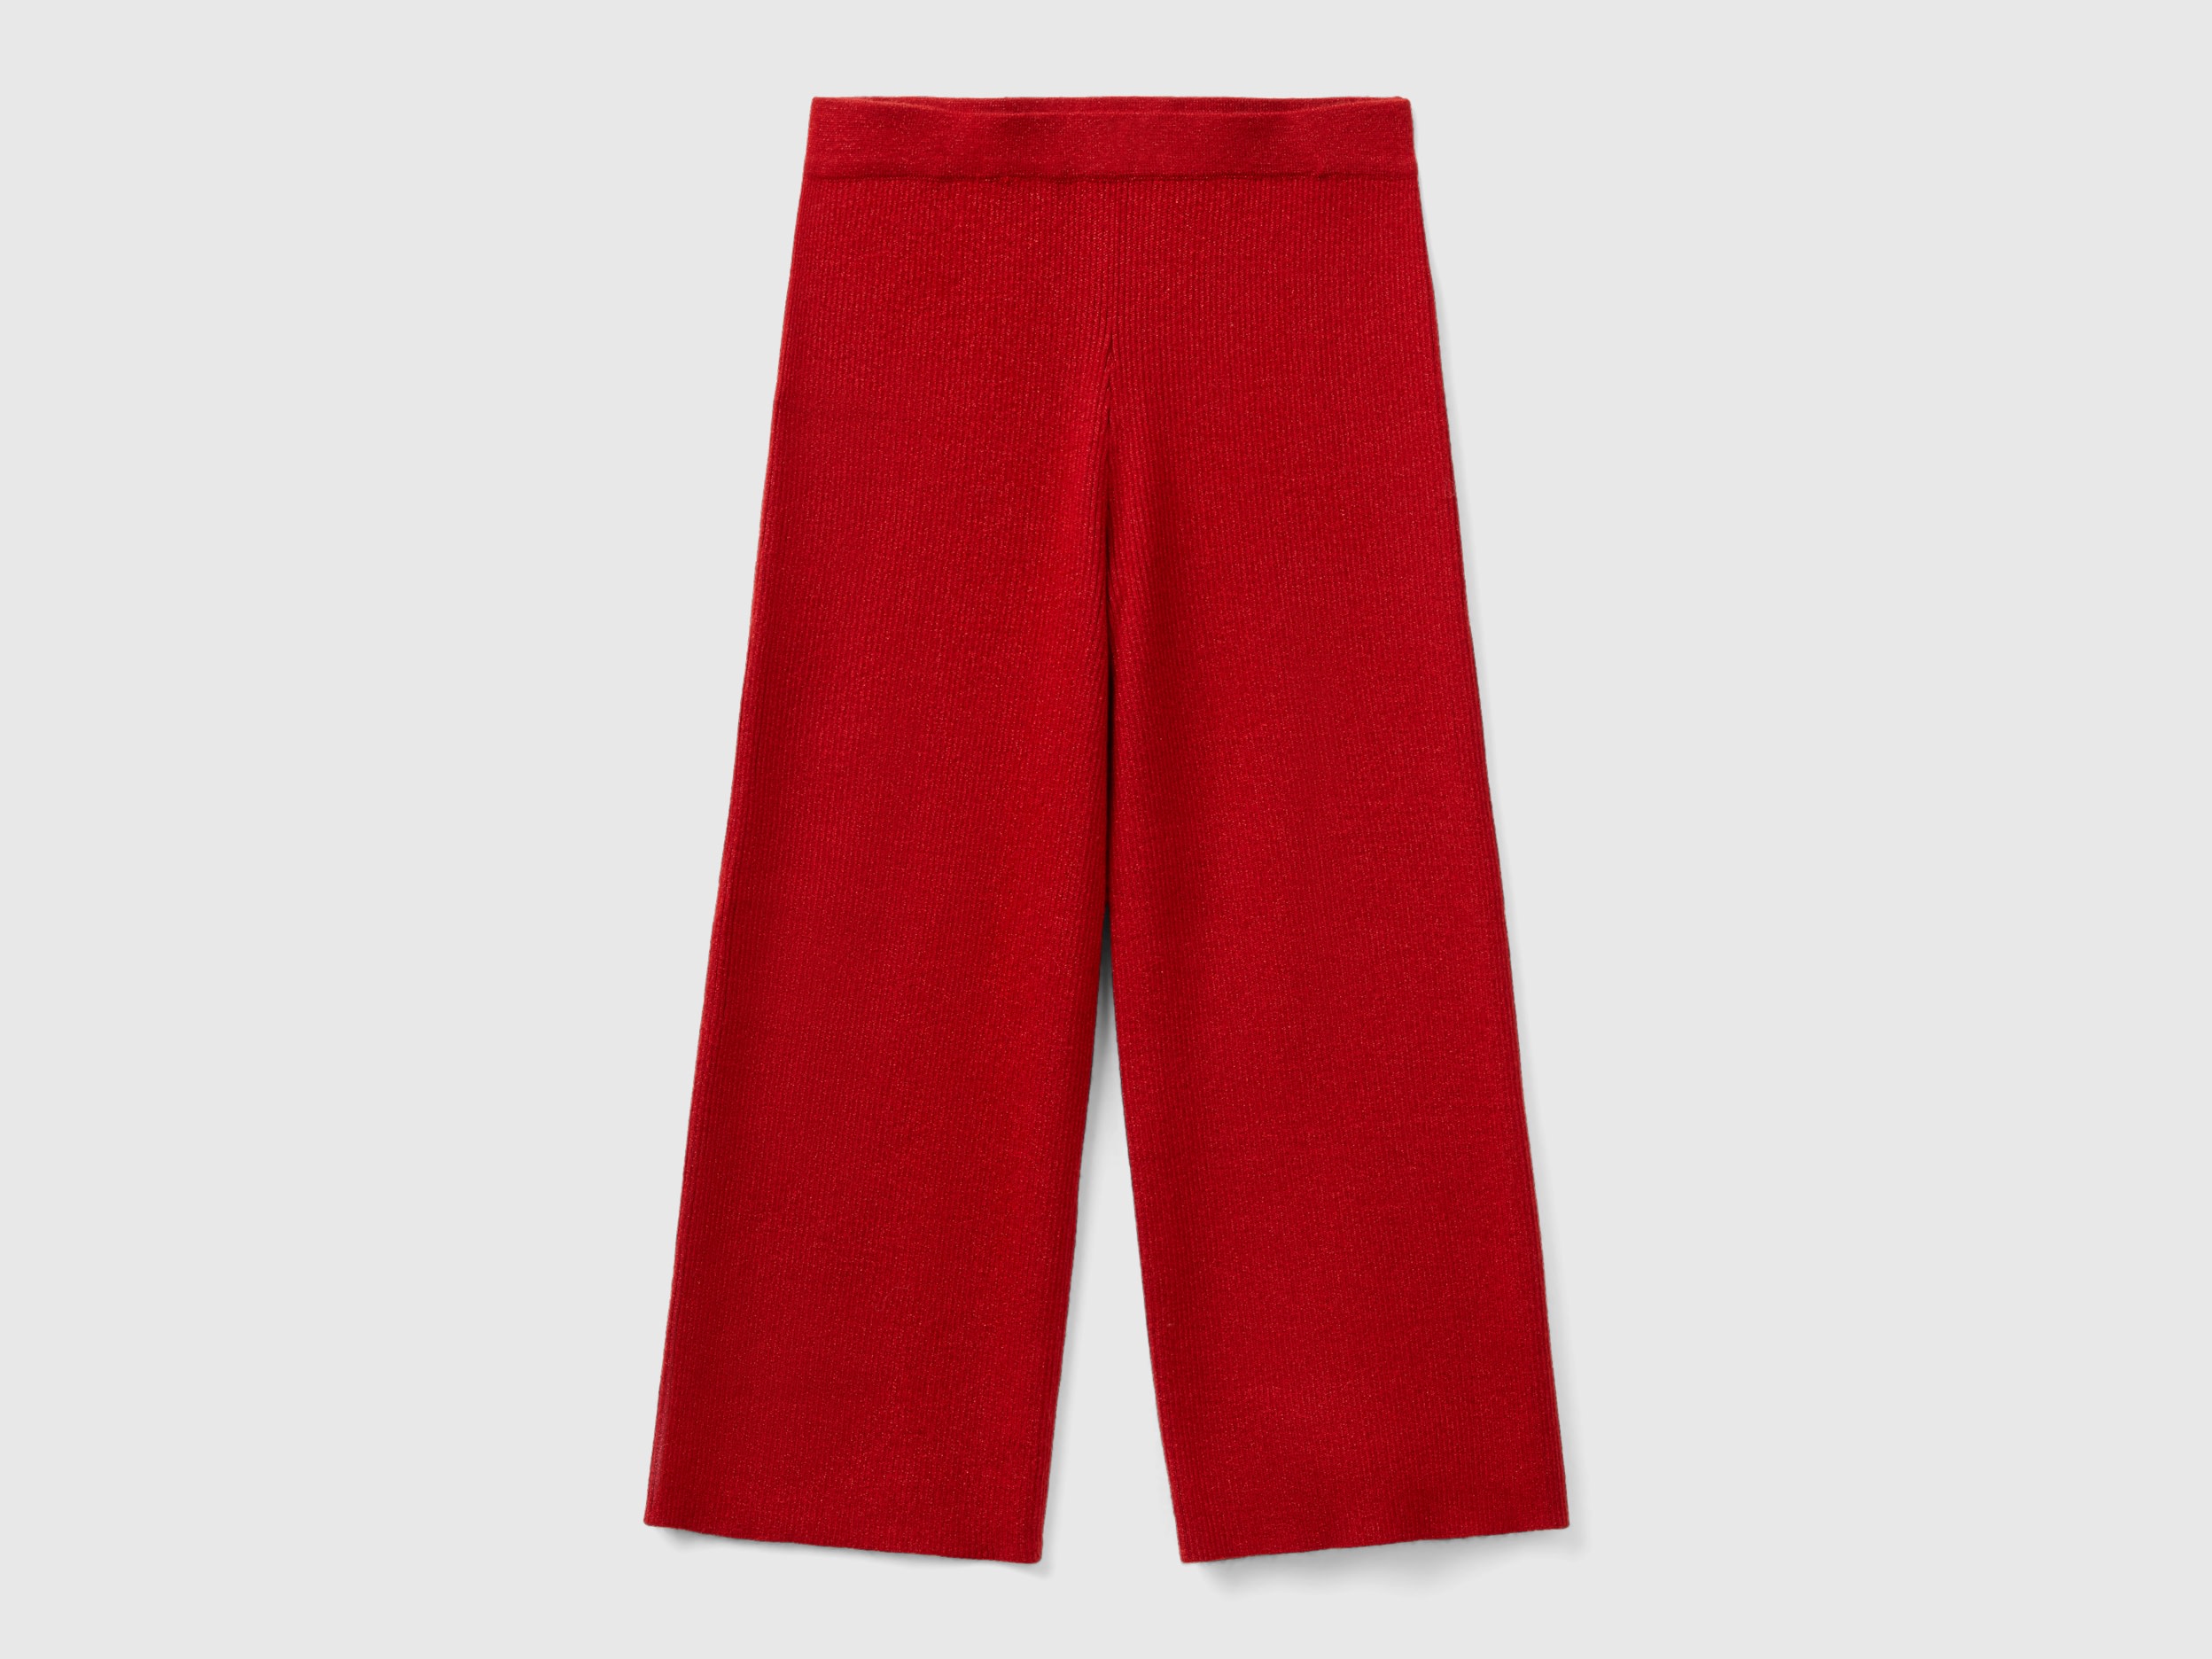 Benetton, Knit Pants With Lurex, size 3XL, Red, Kids